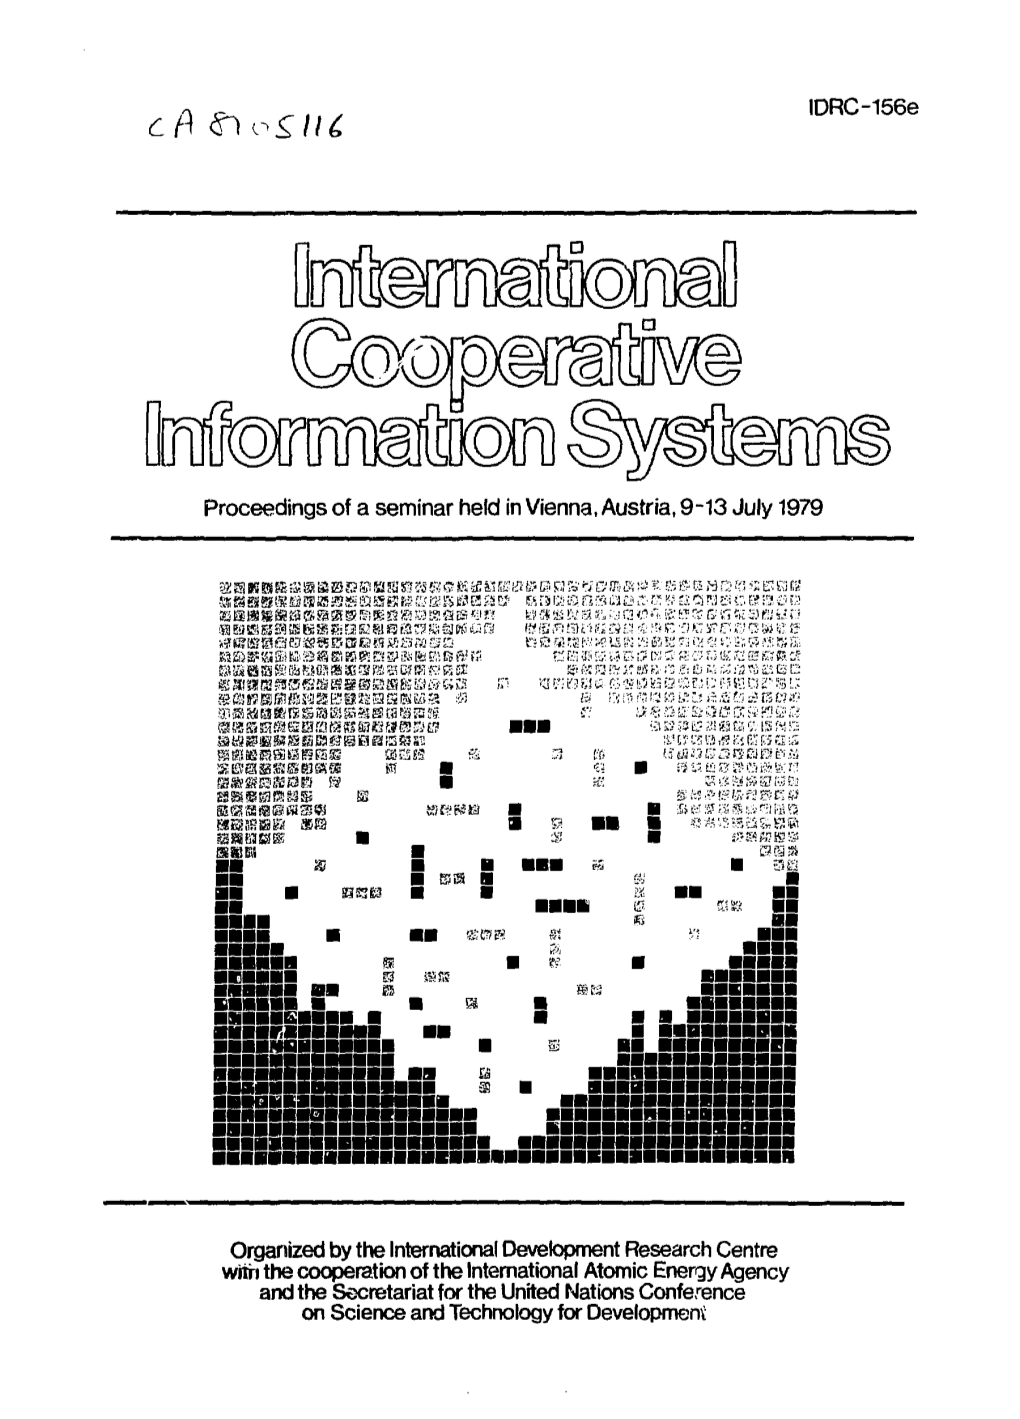 International Cooperative Information Systems : Proceedings of a Seminar Held in Vienna, Austria, 9-13 July 1919